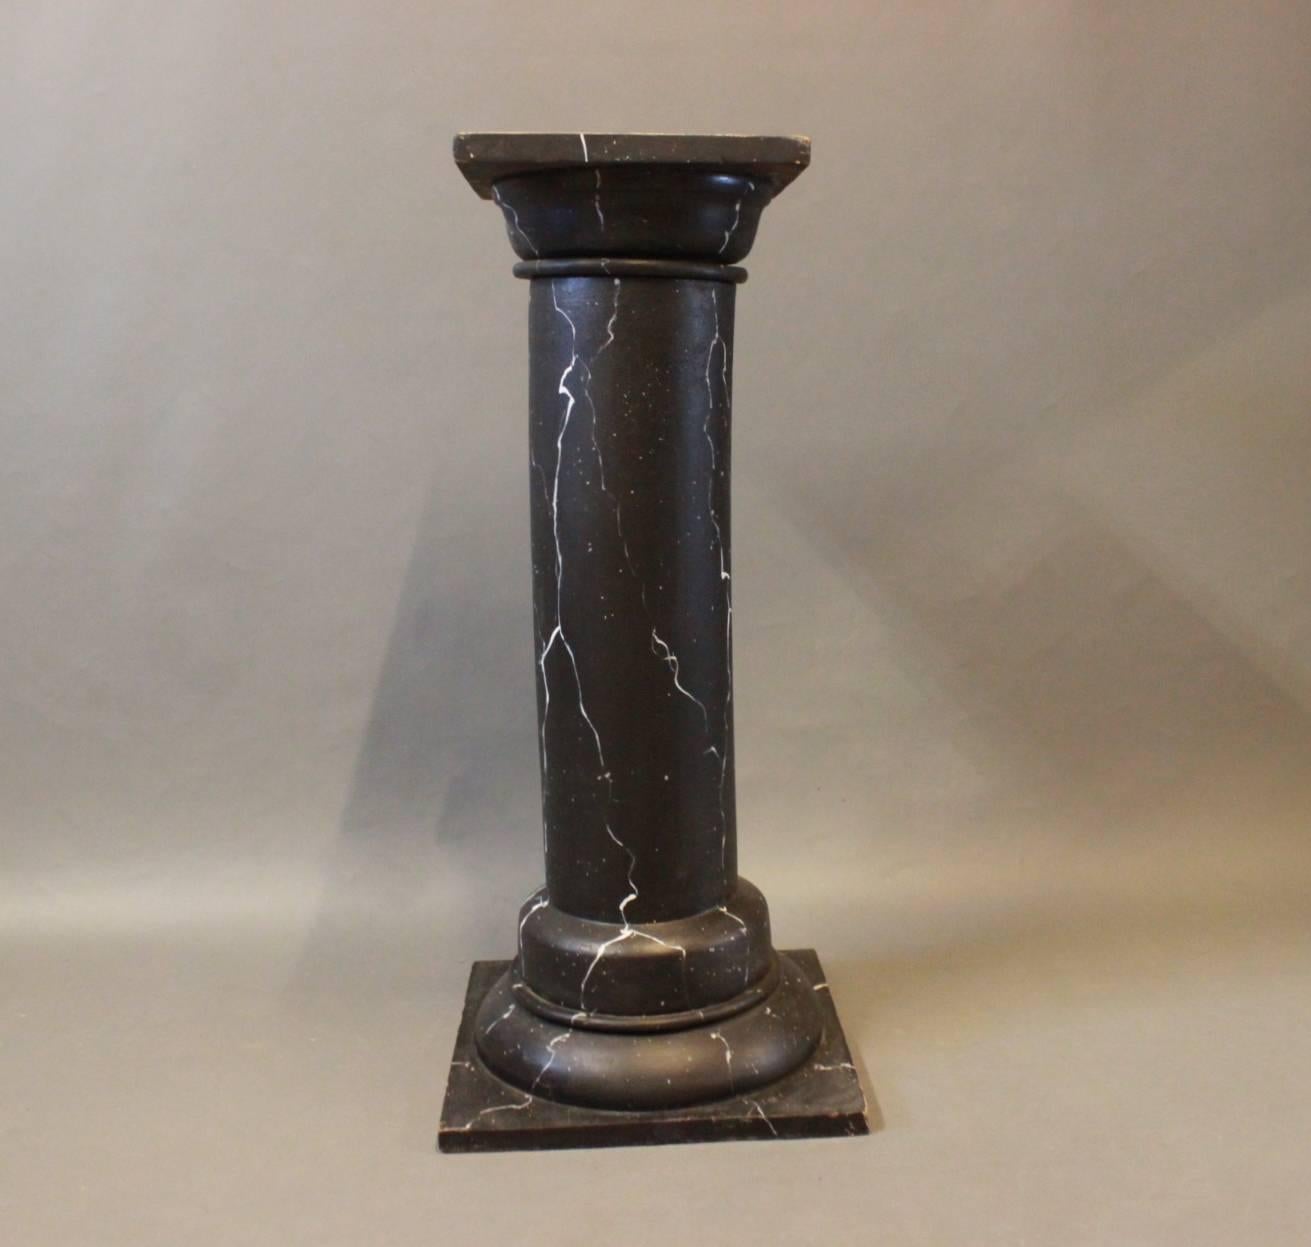 This marbled pedestal, dating back to the circa 1930s, exudes a timeless charm with its striking black and white painted wood construction. Its marbled appearance adds an elegant touch to any space, evoking a sense of sophistication and classic